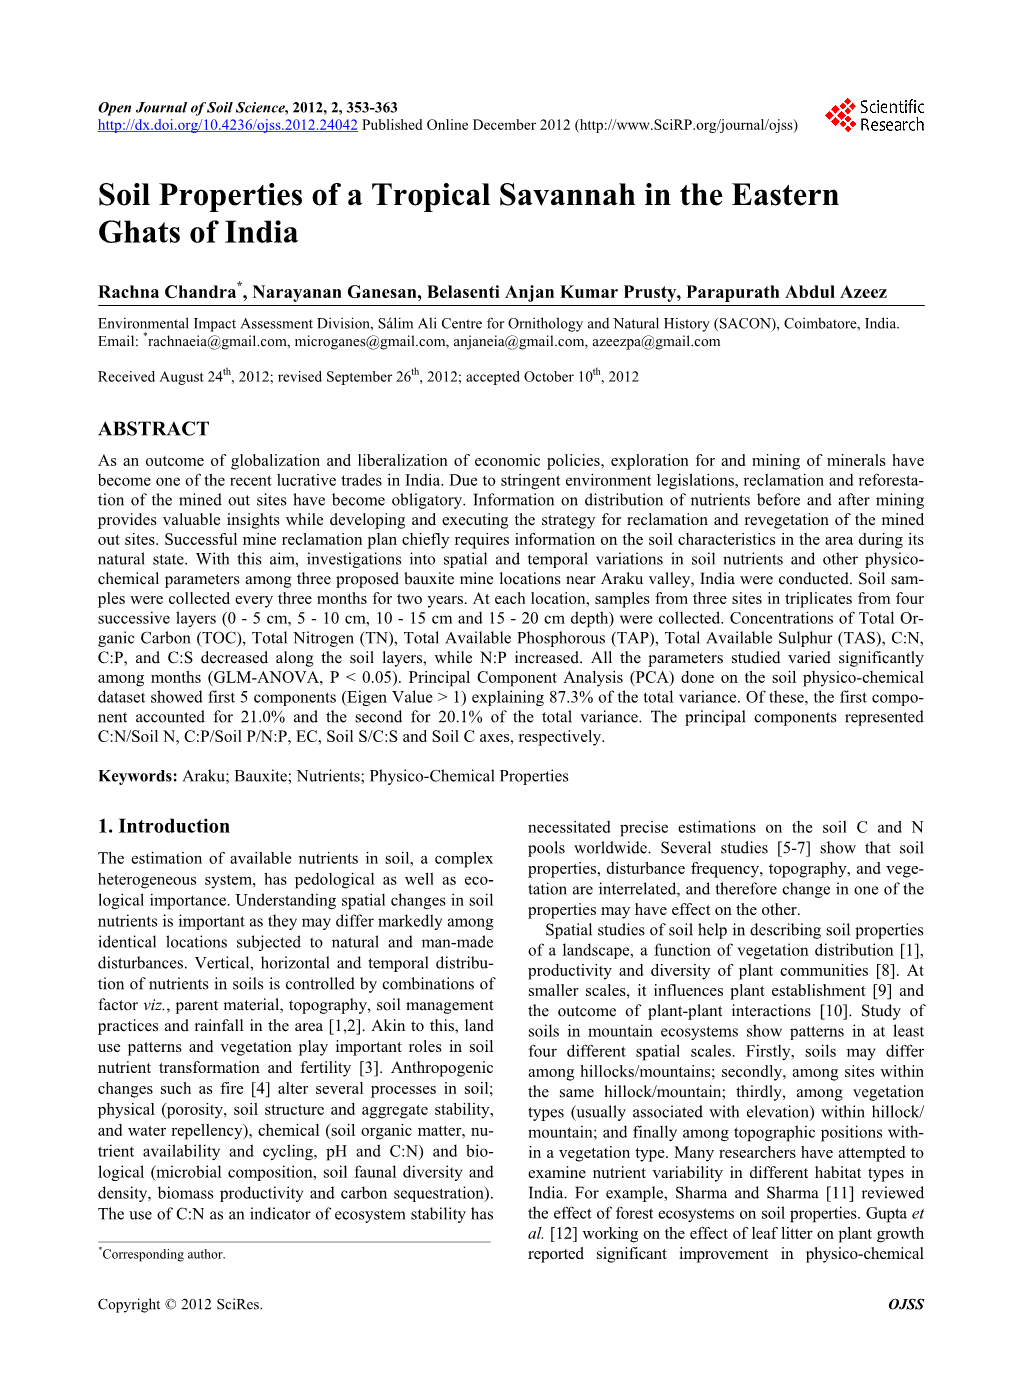 Soil Properties of a Tropical Savannah in the Eastern Ghats of India